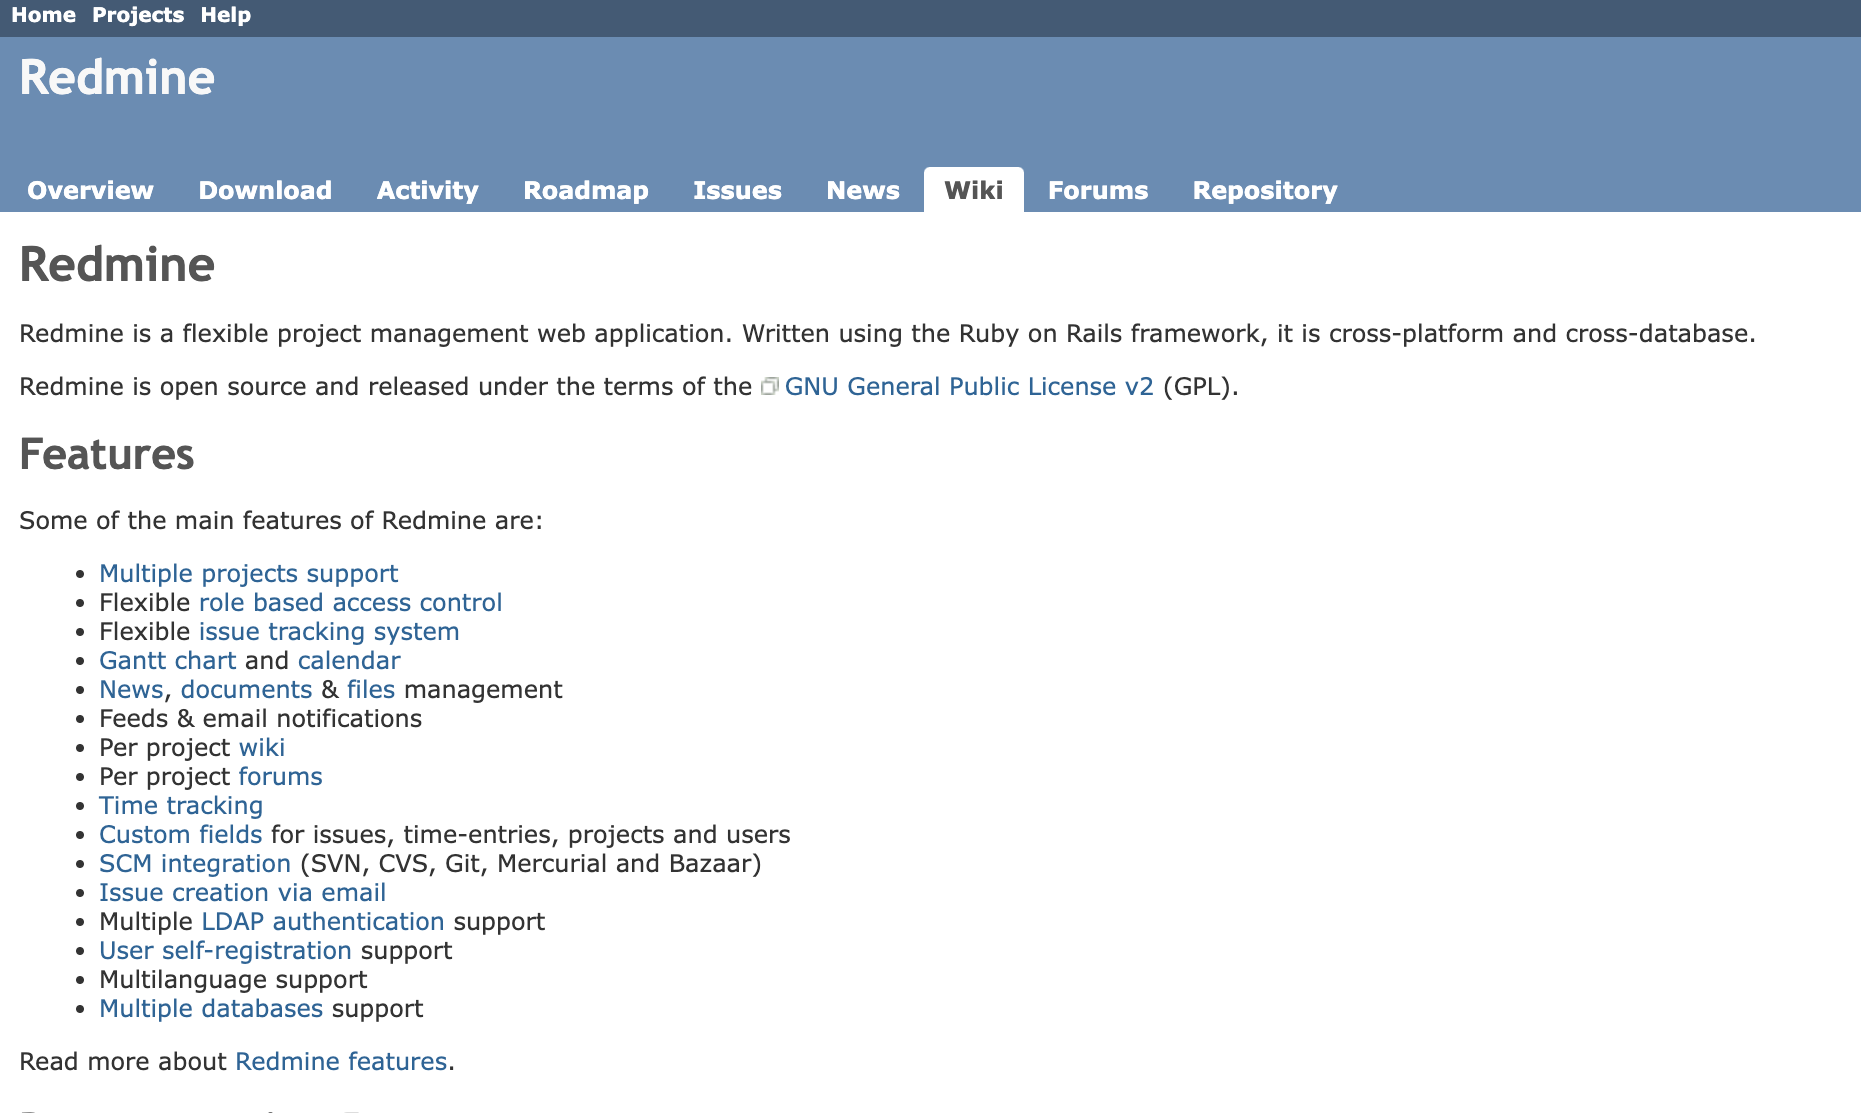 Top page of Redmine